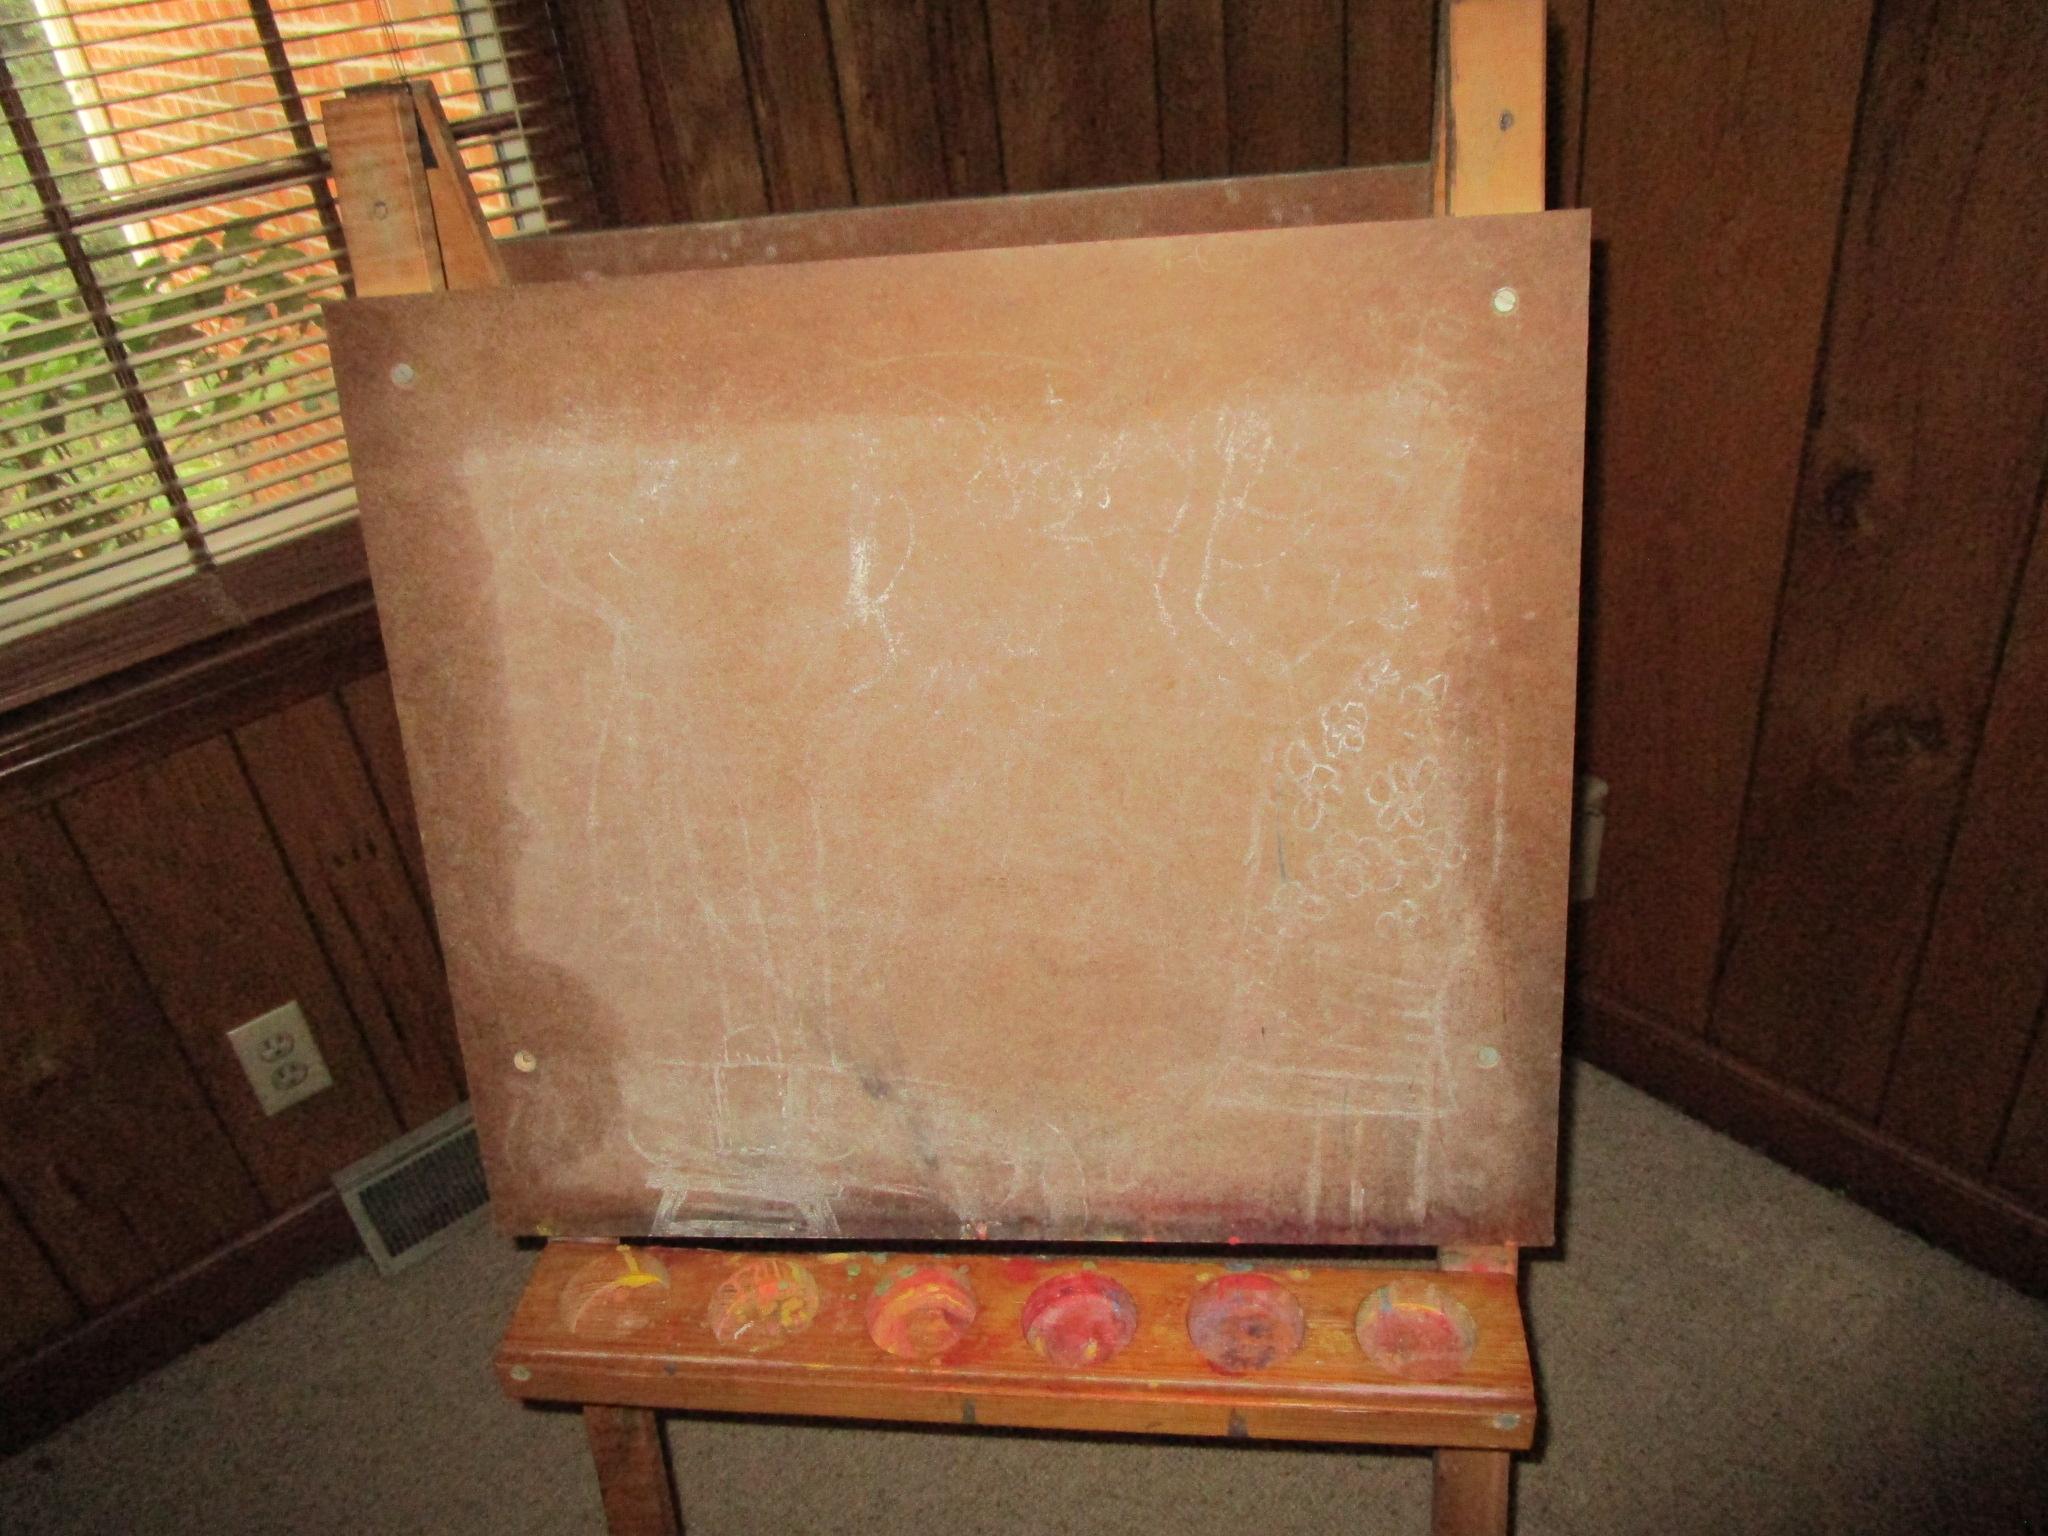 A Frame Wooden Art Easel - Used condition